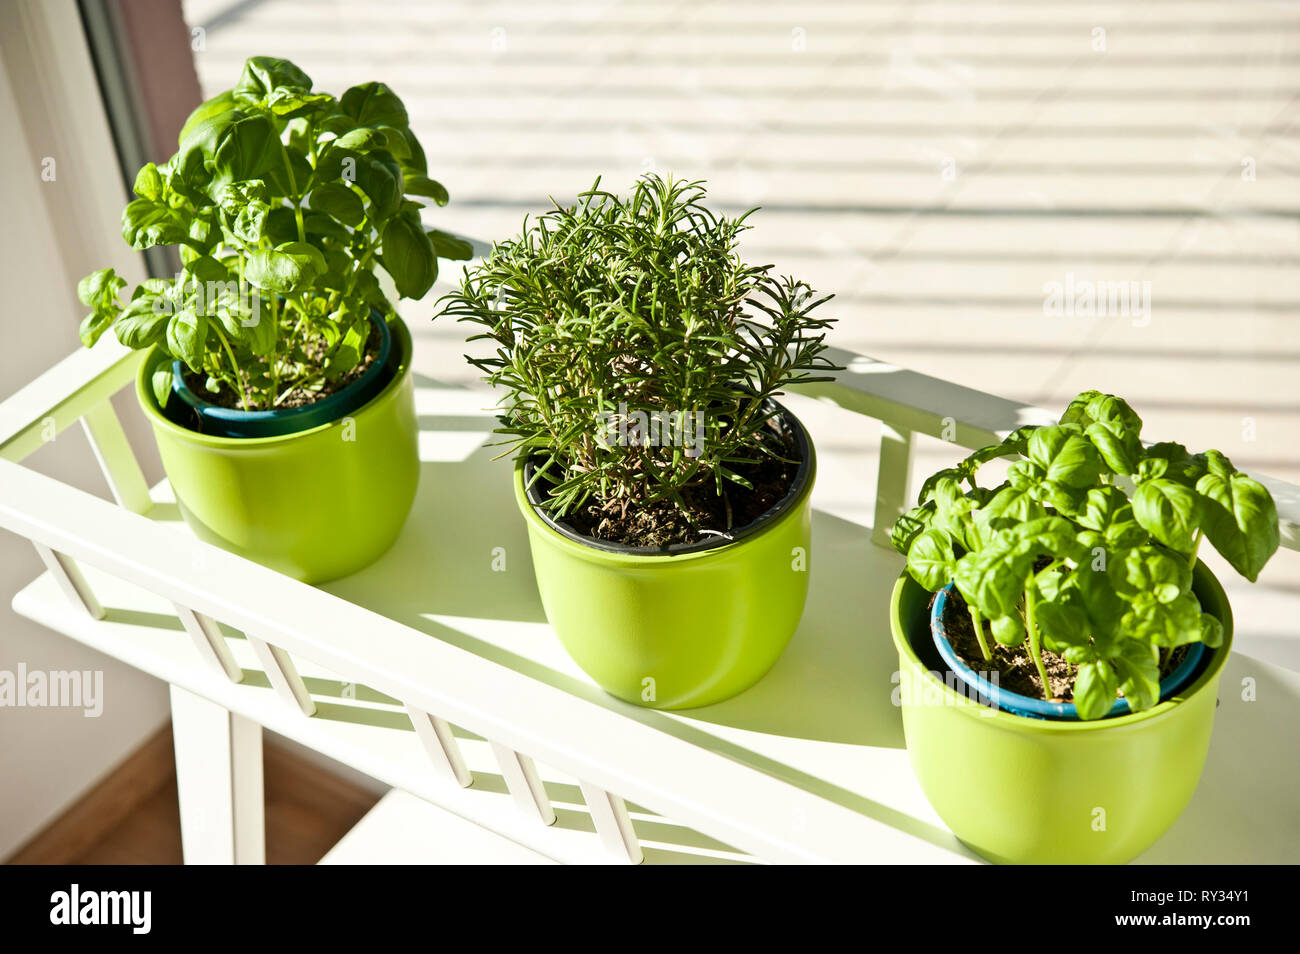 basil and rosemary plants in green vases Stock Photo